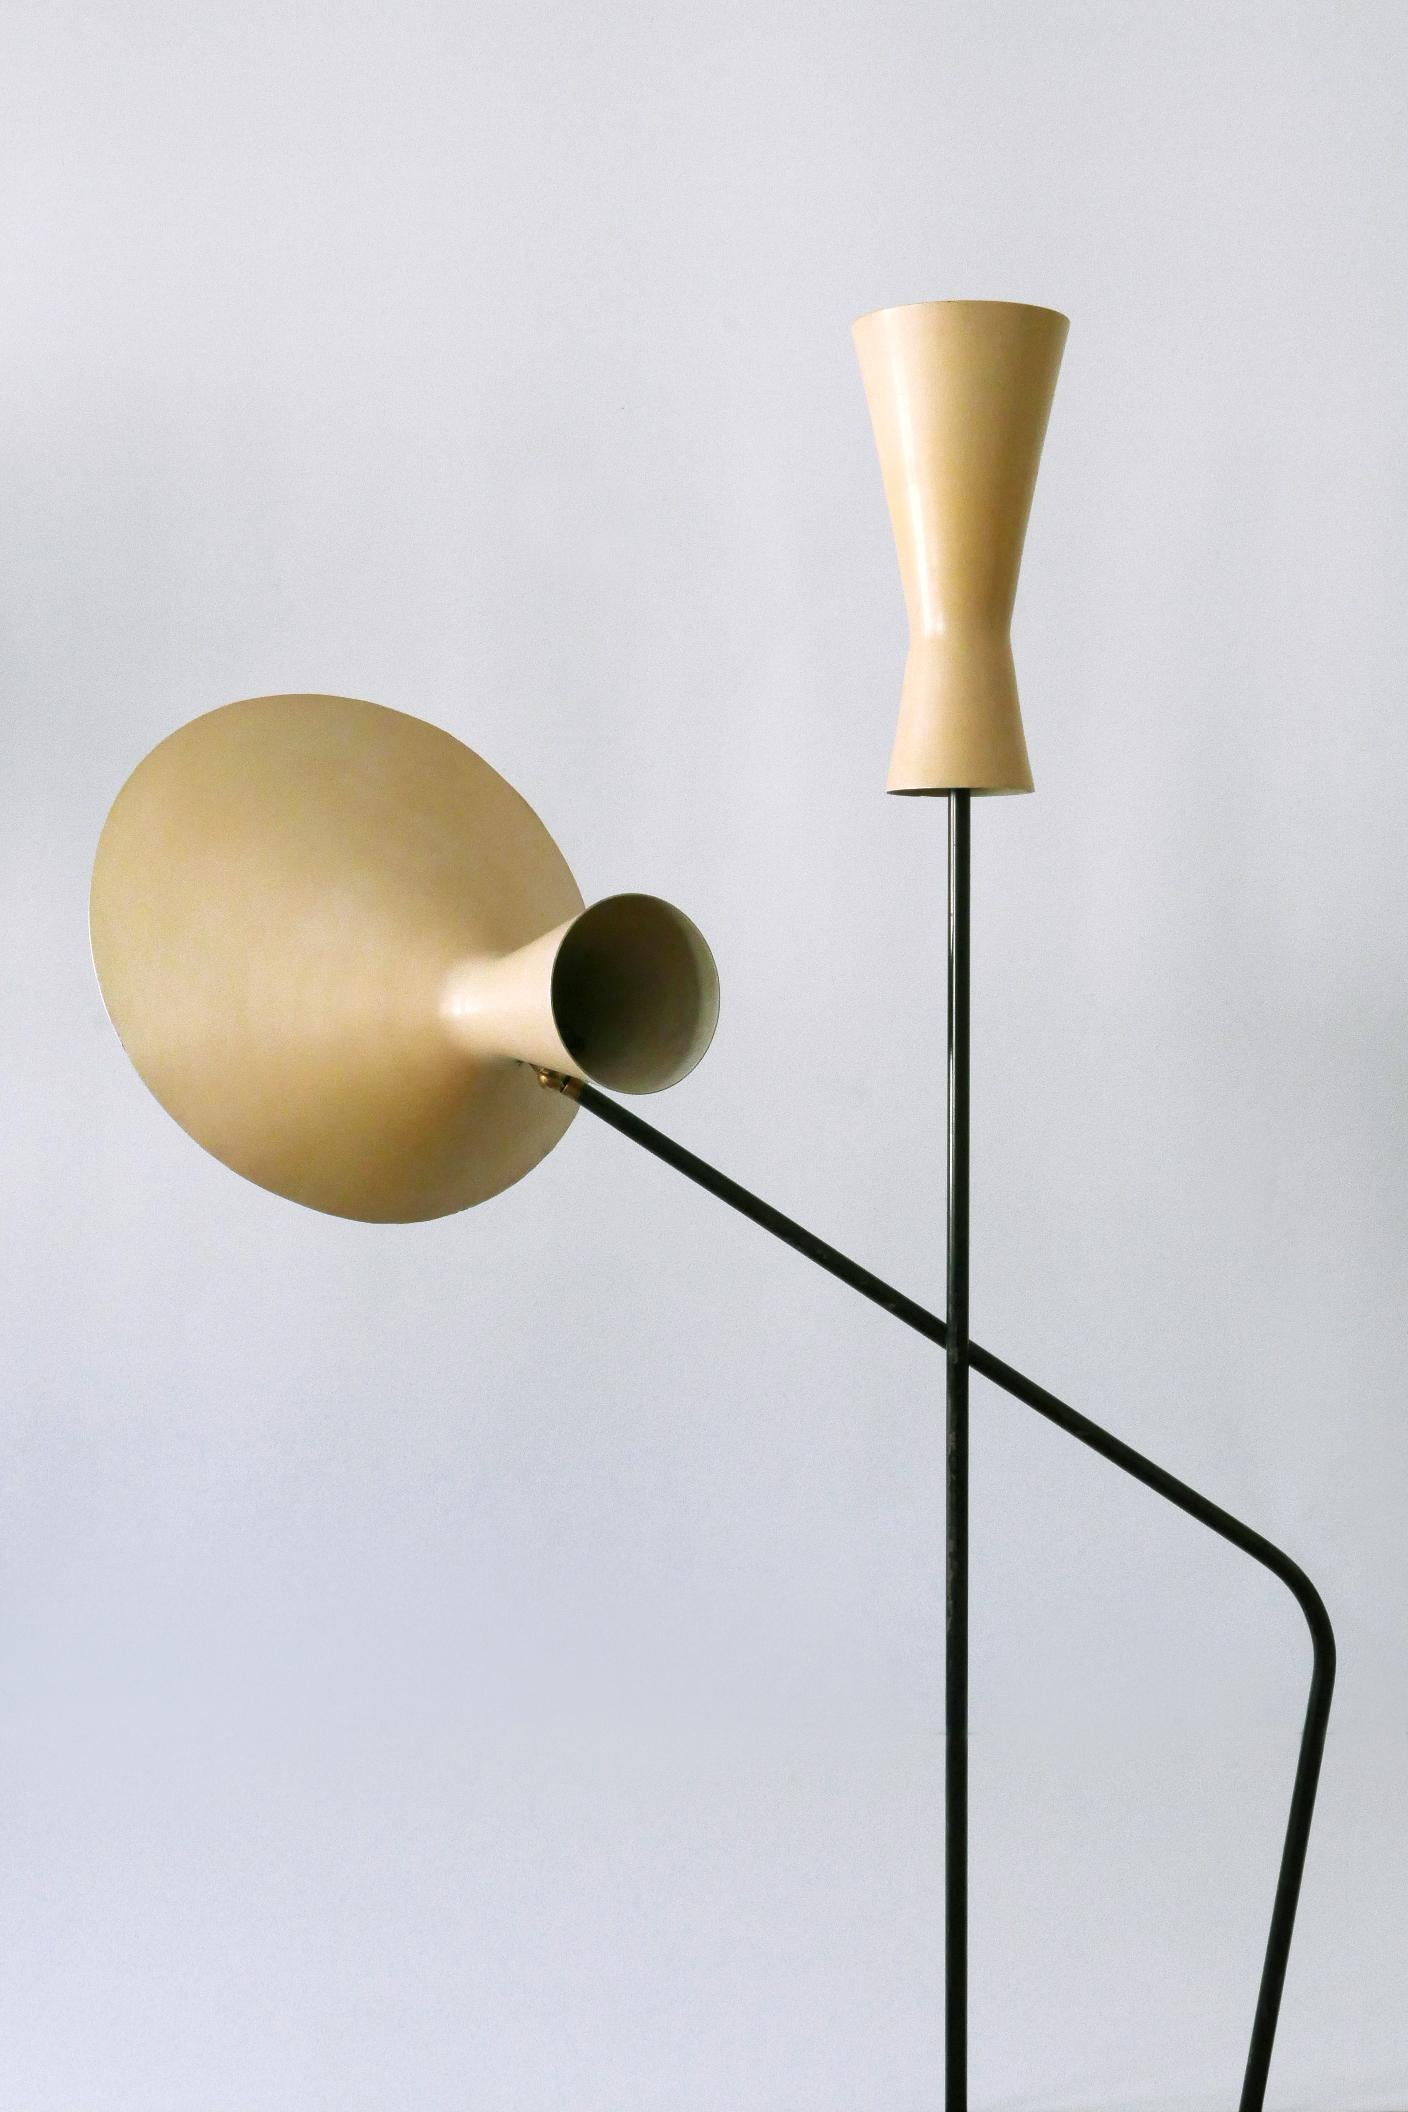 Mid-20th Century Rare Iconic Mid-Century Modern Floor Lamp by Prof. Carl Moor for BAG Turgi 1950s For Sale